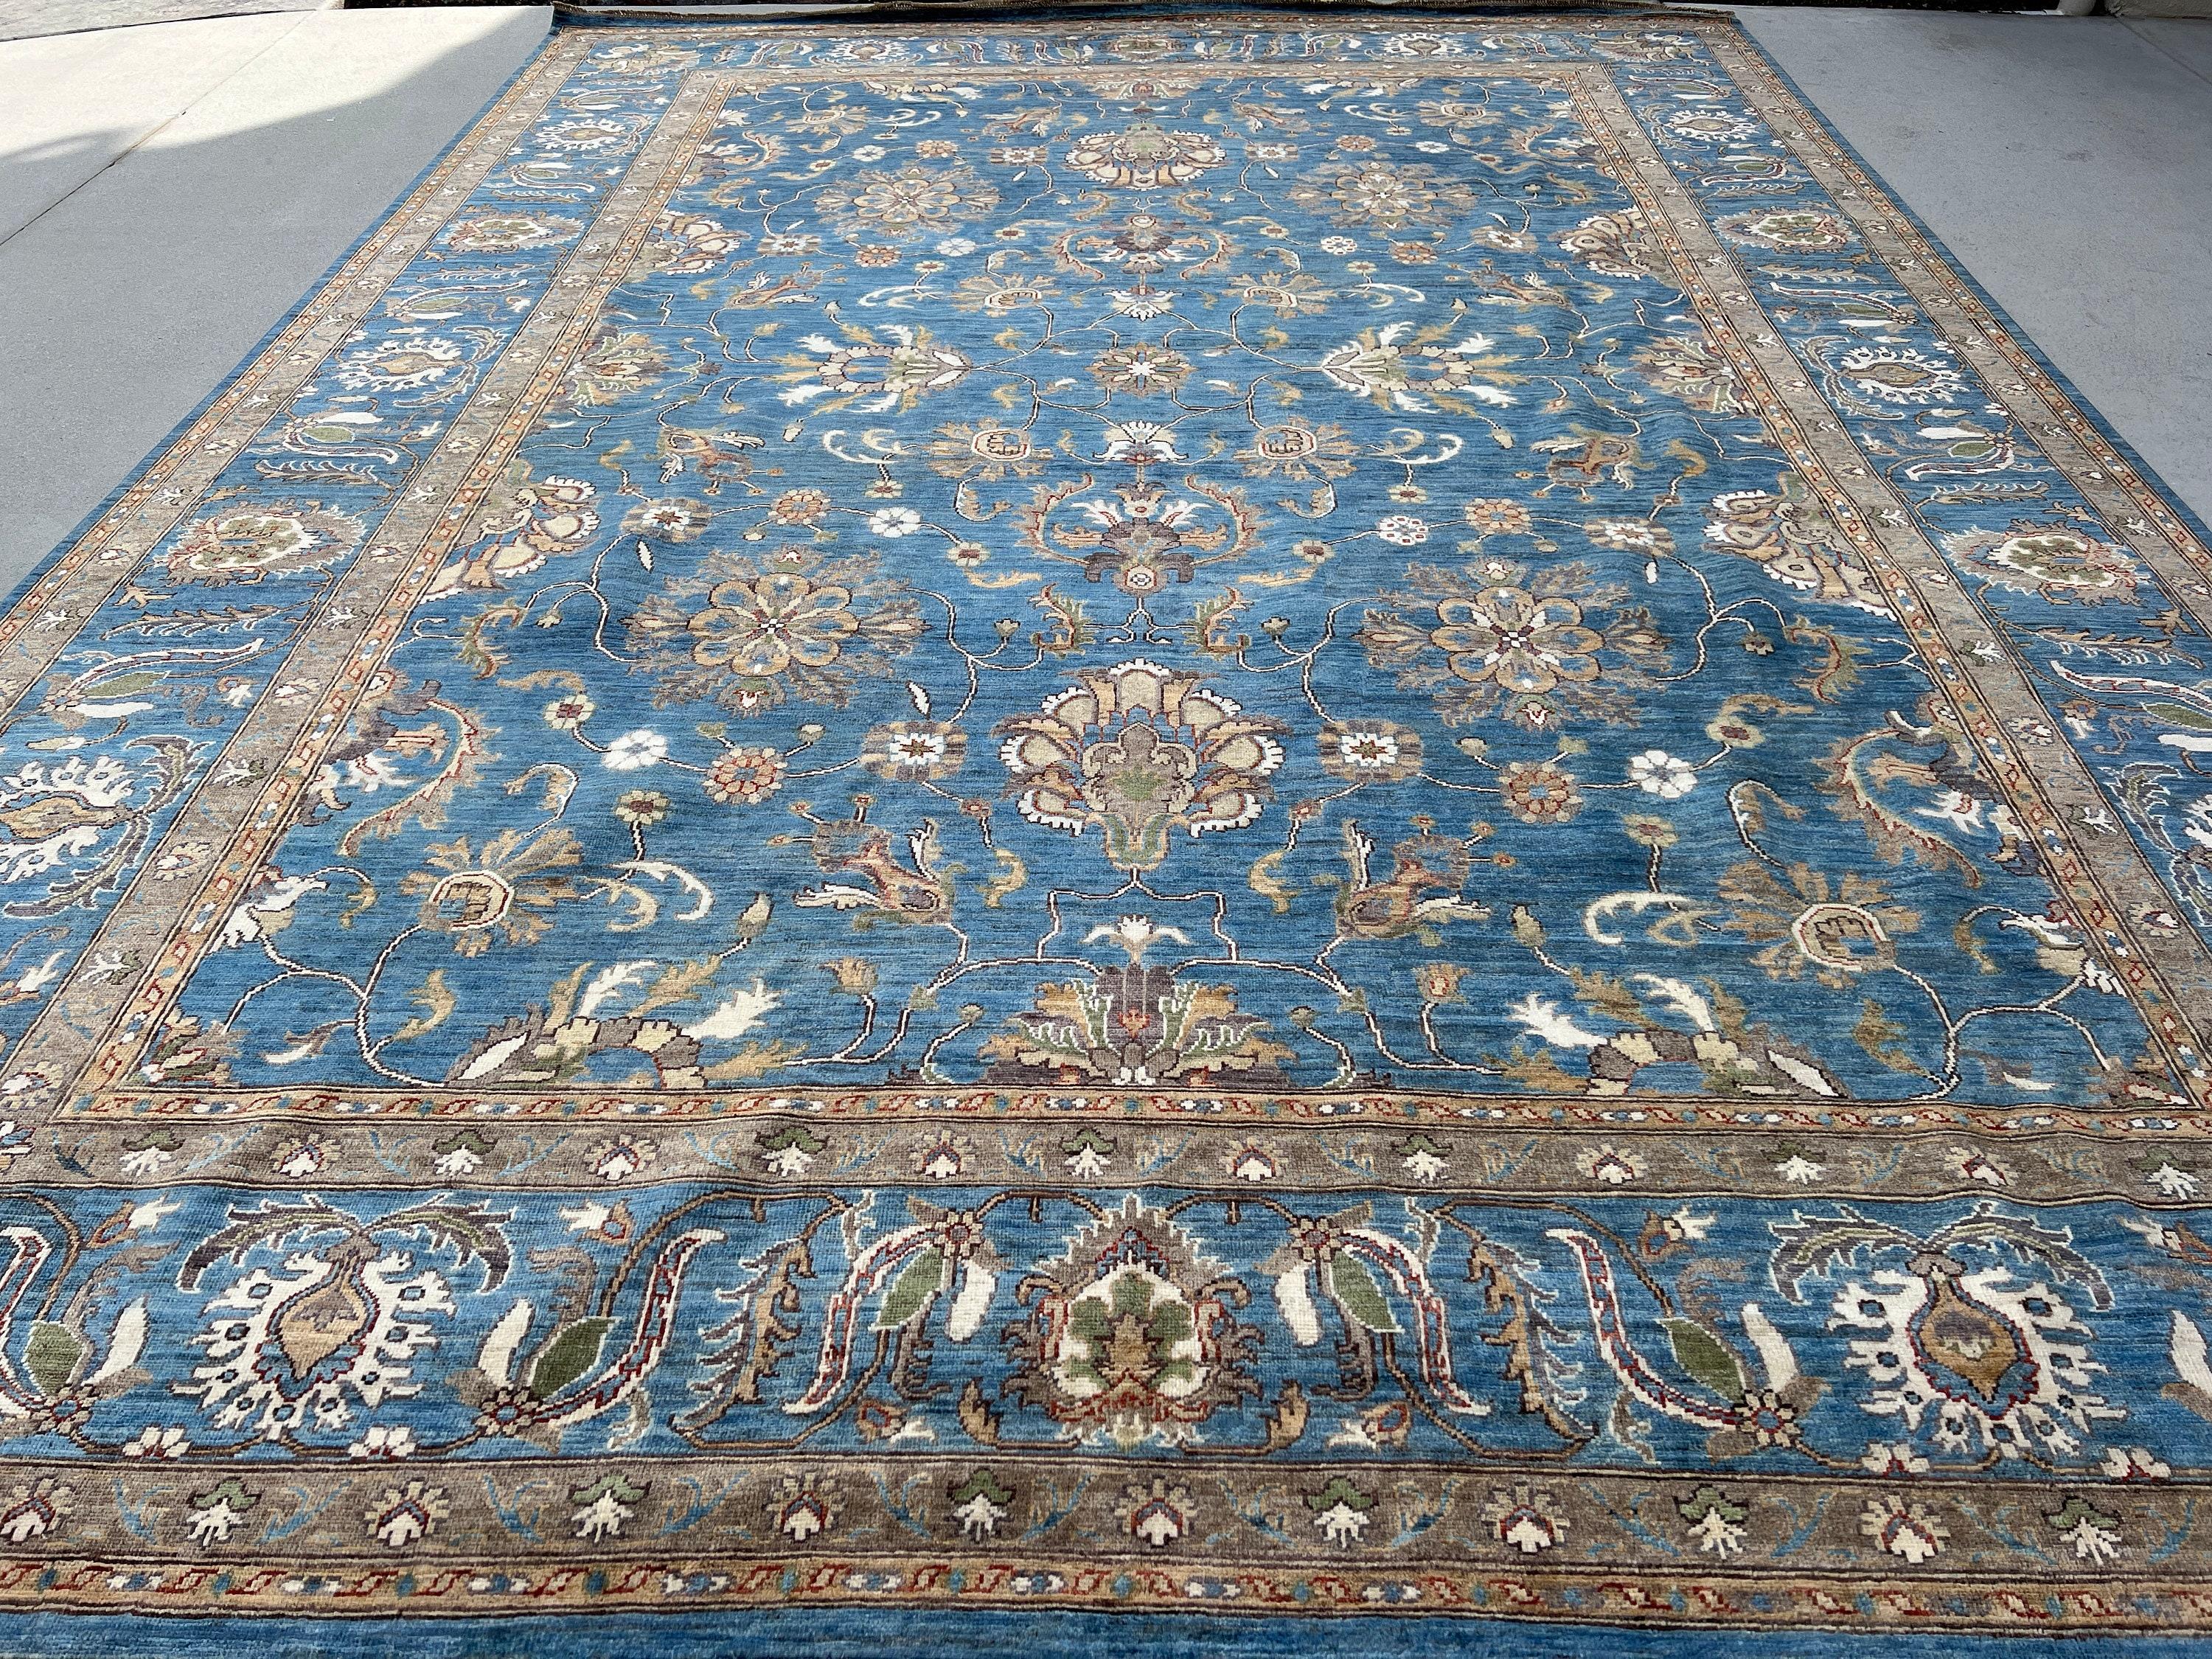 10x14 Hand-Knotted Afghan Rug Premium Hand-Spun Afghan Wool Fair Trade In New Condition For Sale In San Marcos, CA